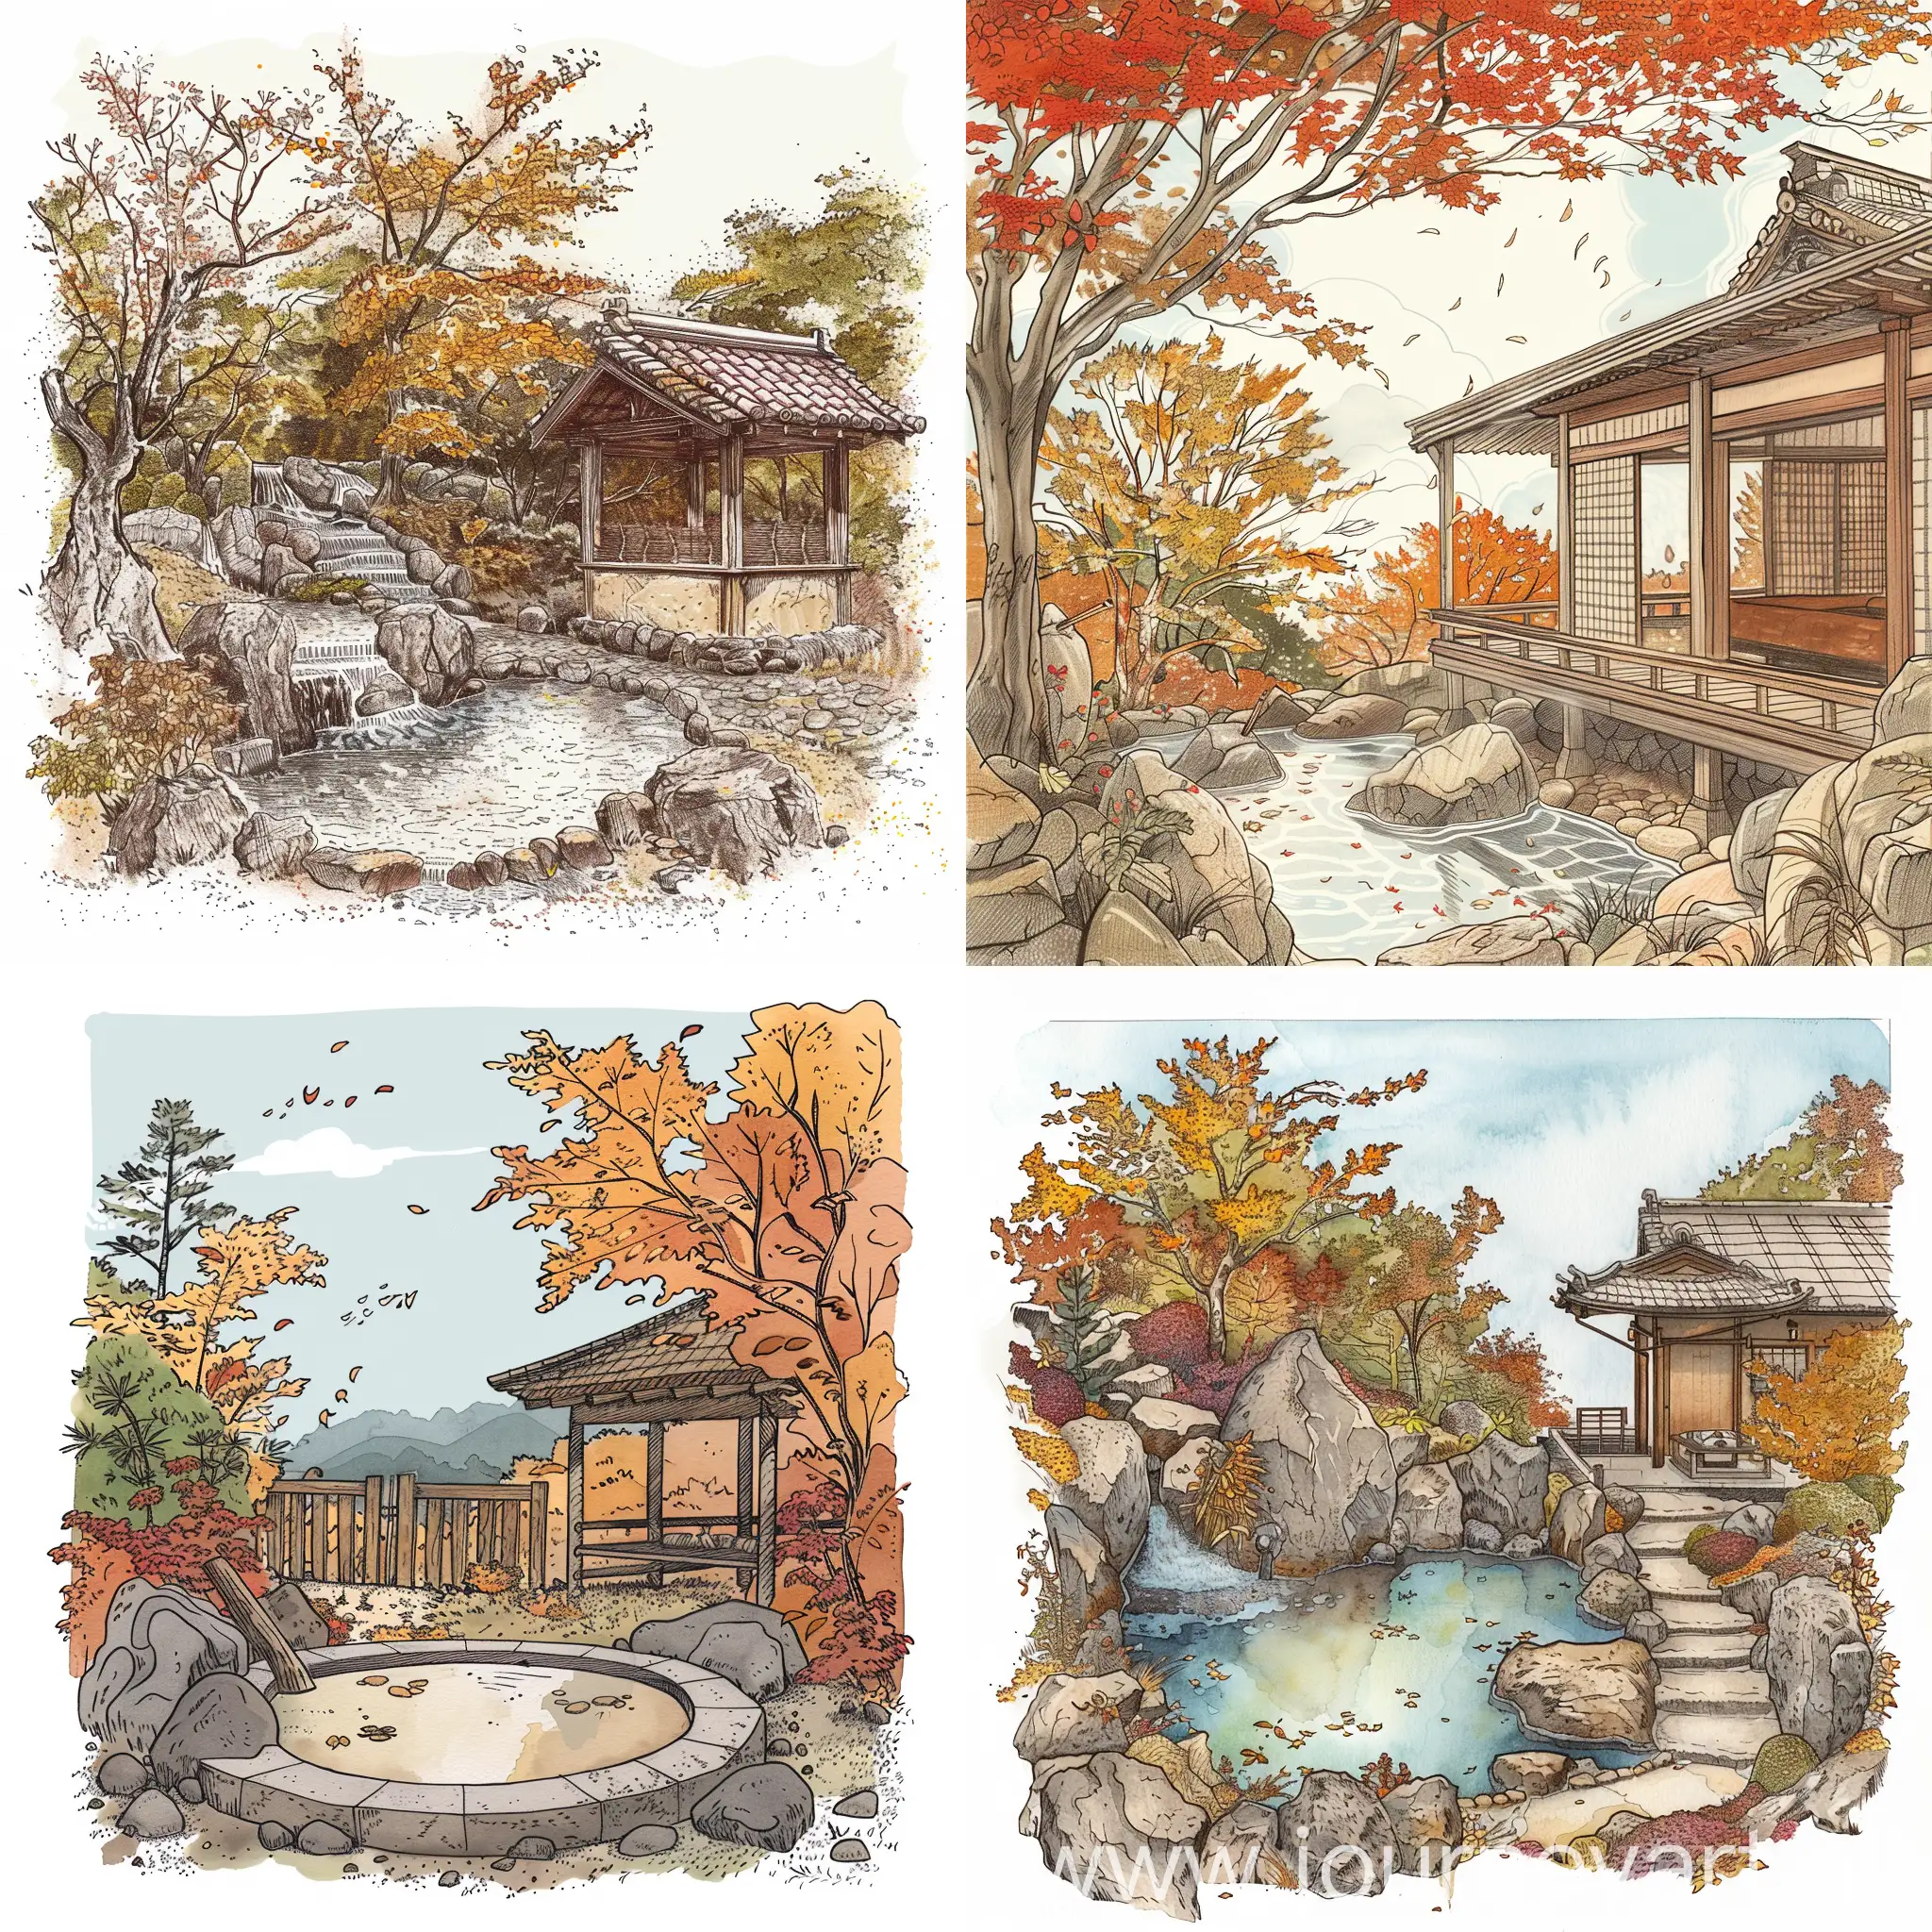 Tranquil-Autumn-Scene-Traditional-OpenAir-Onsen-in-Nature